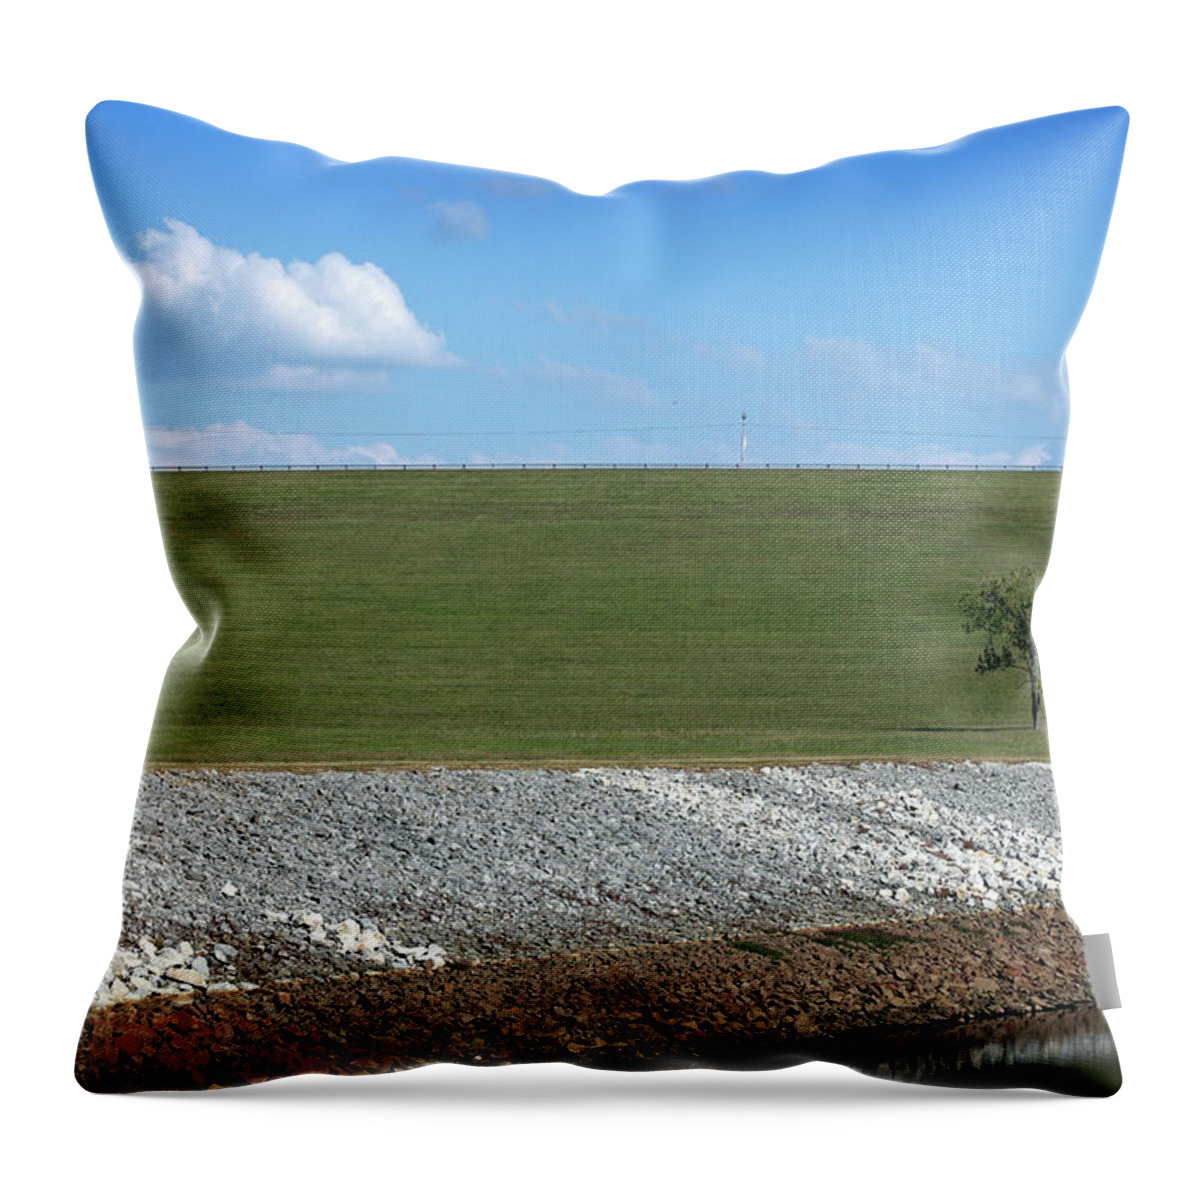 Lonely Throw Pillow featuring the photograph Lonely Tree by Amber Flowers